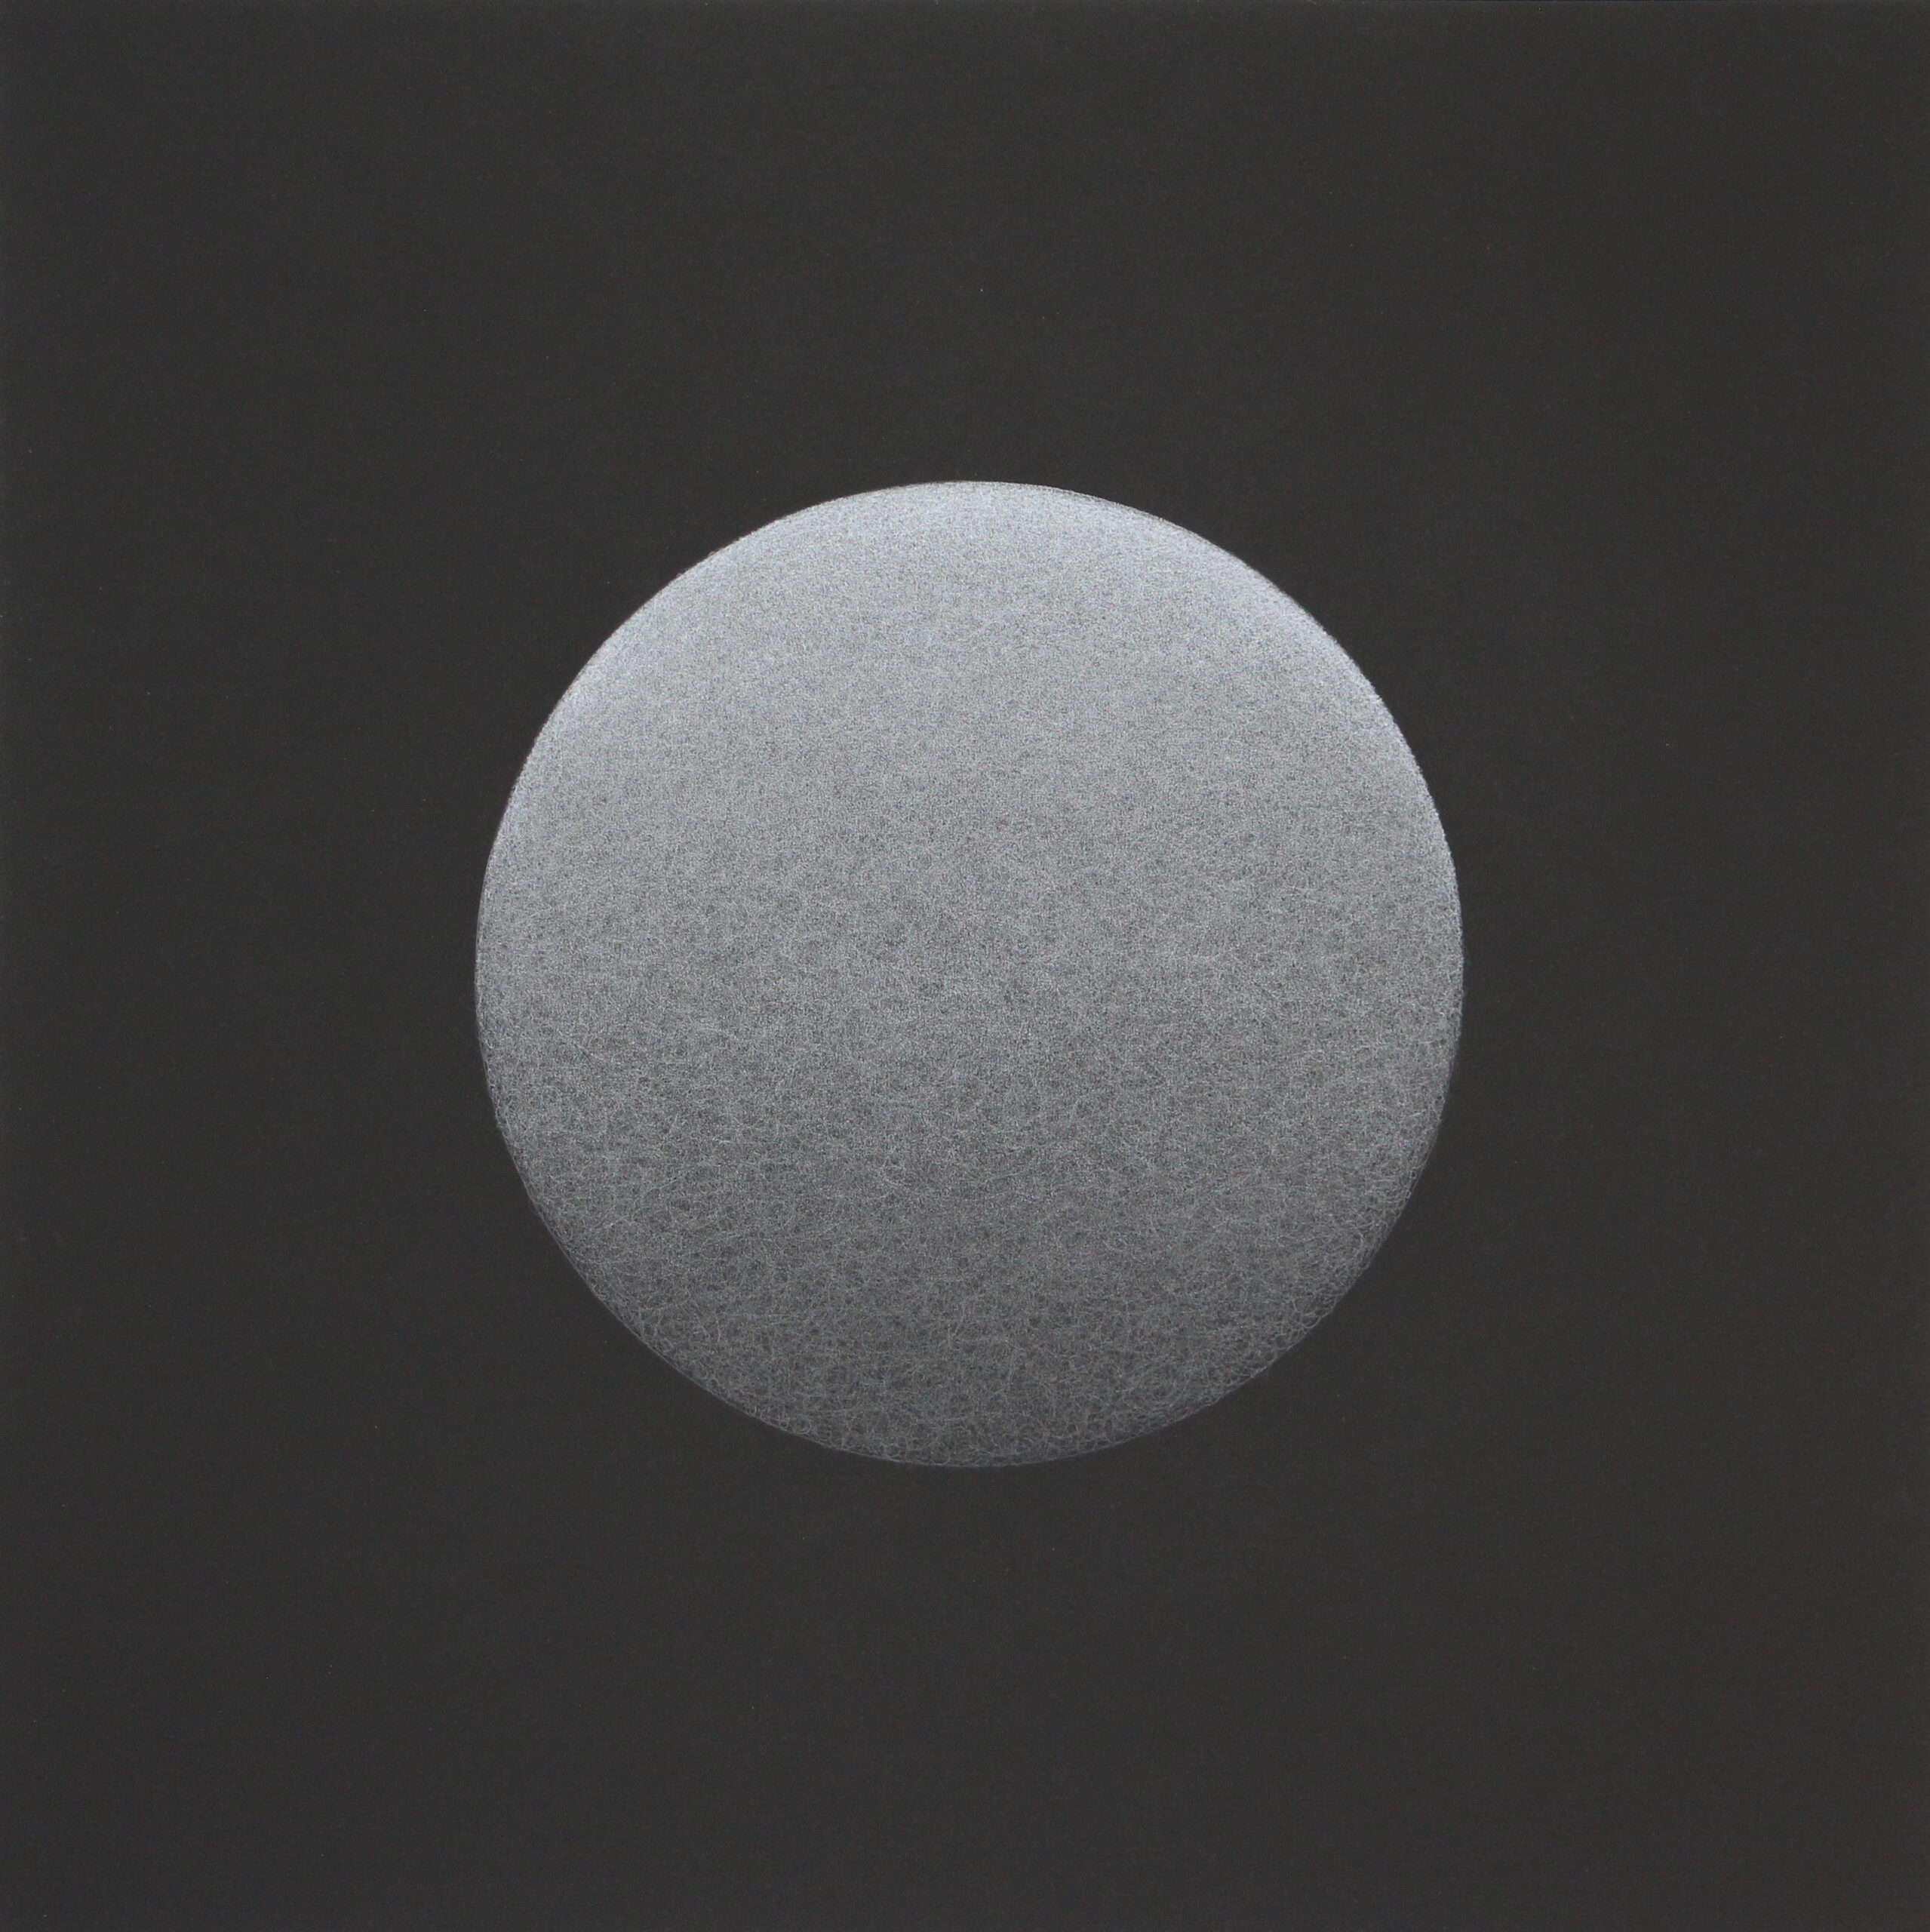 Quantum Entanglement (Gray Sphere 3) , 2021, colored pencil on museum board, 20 x 20"